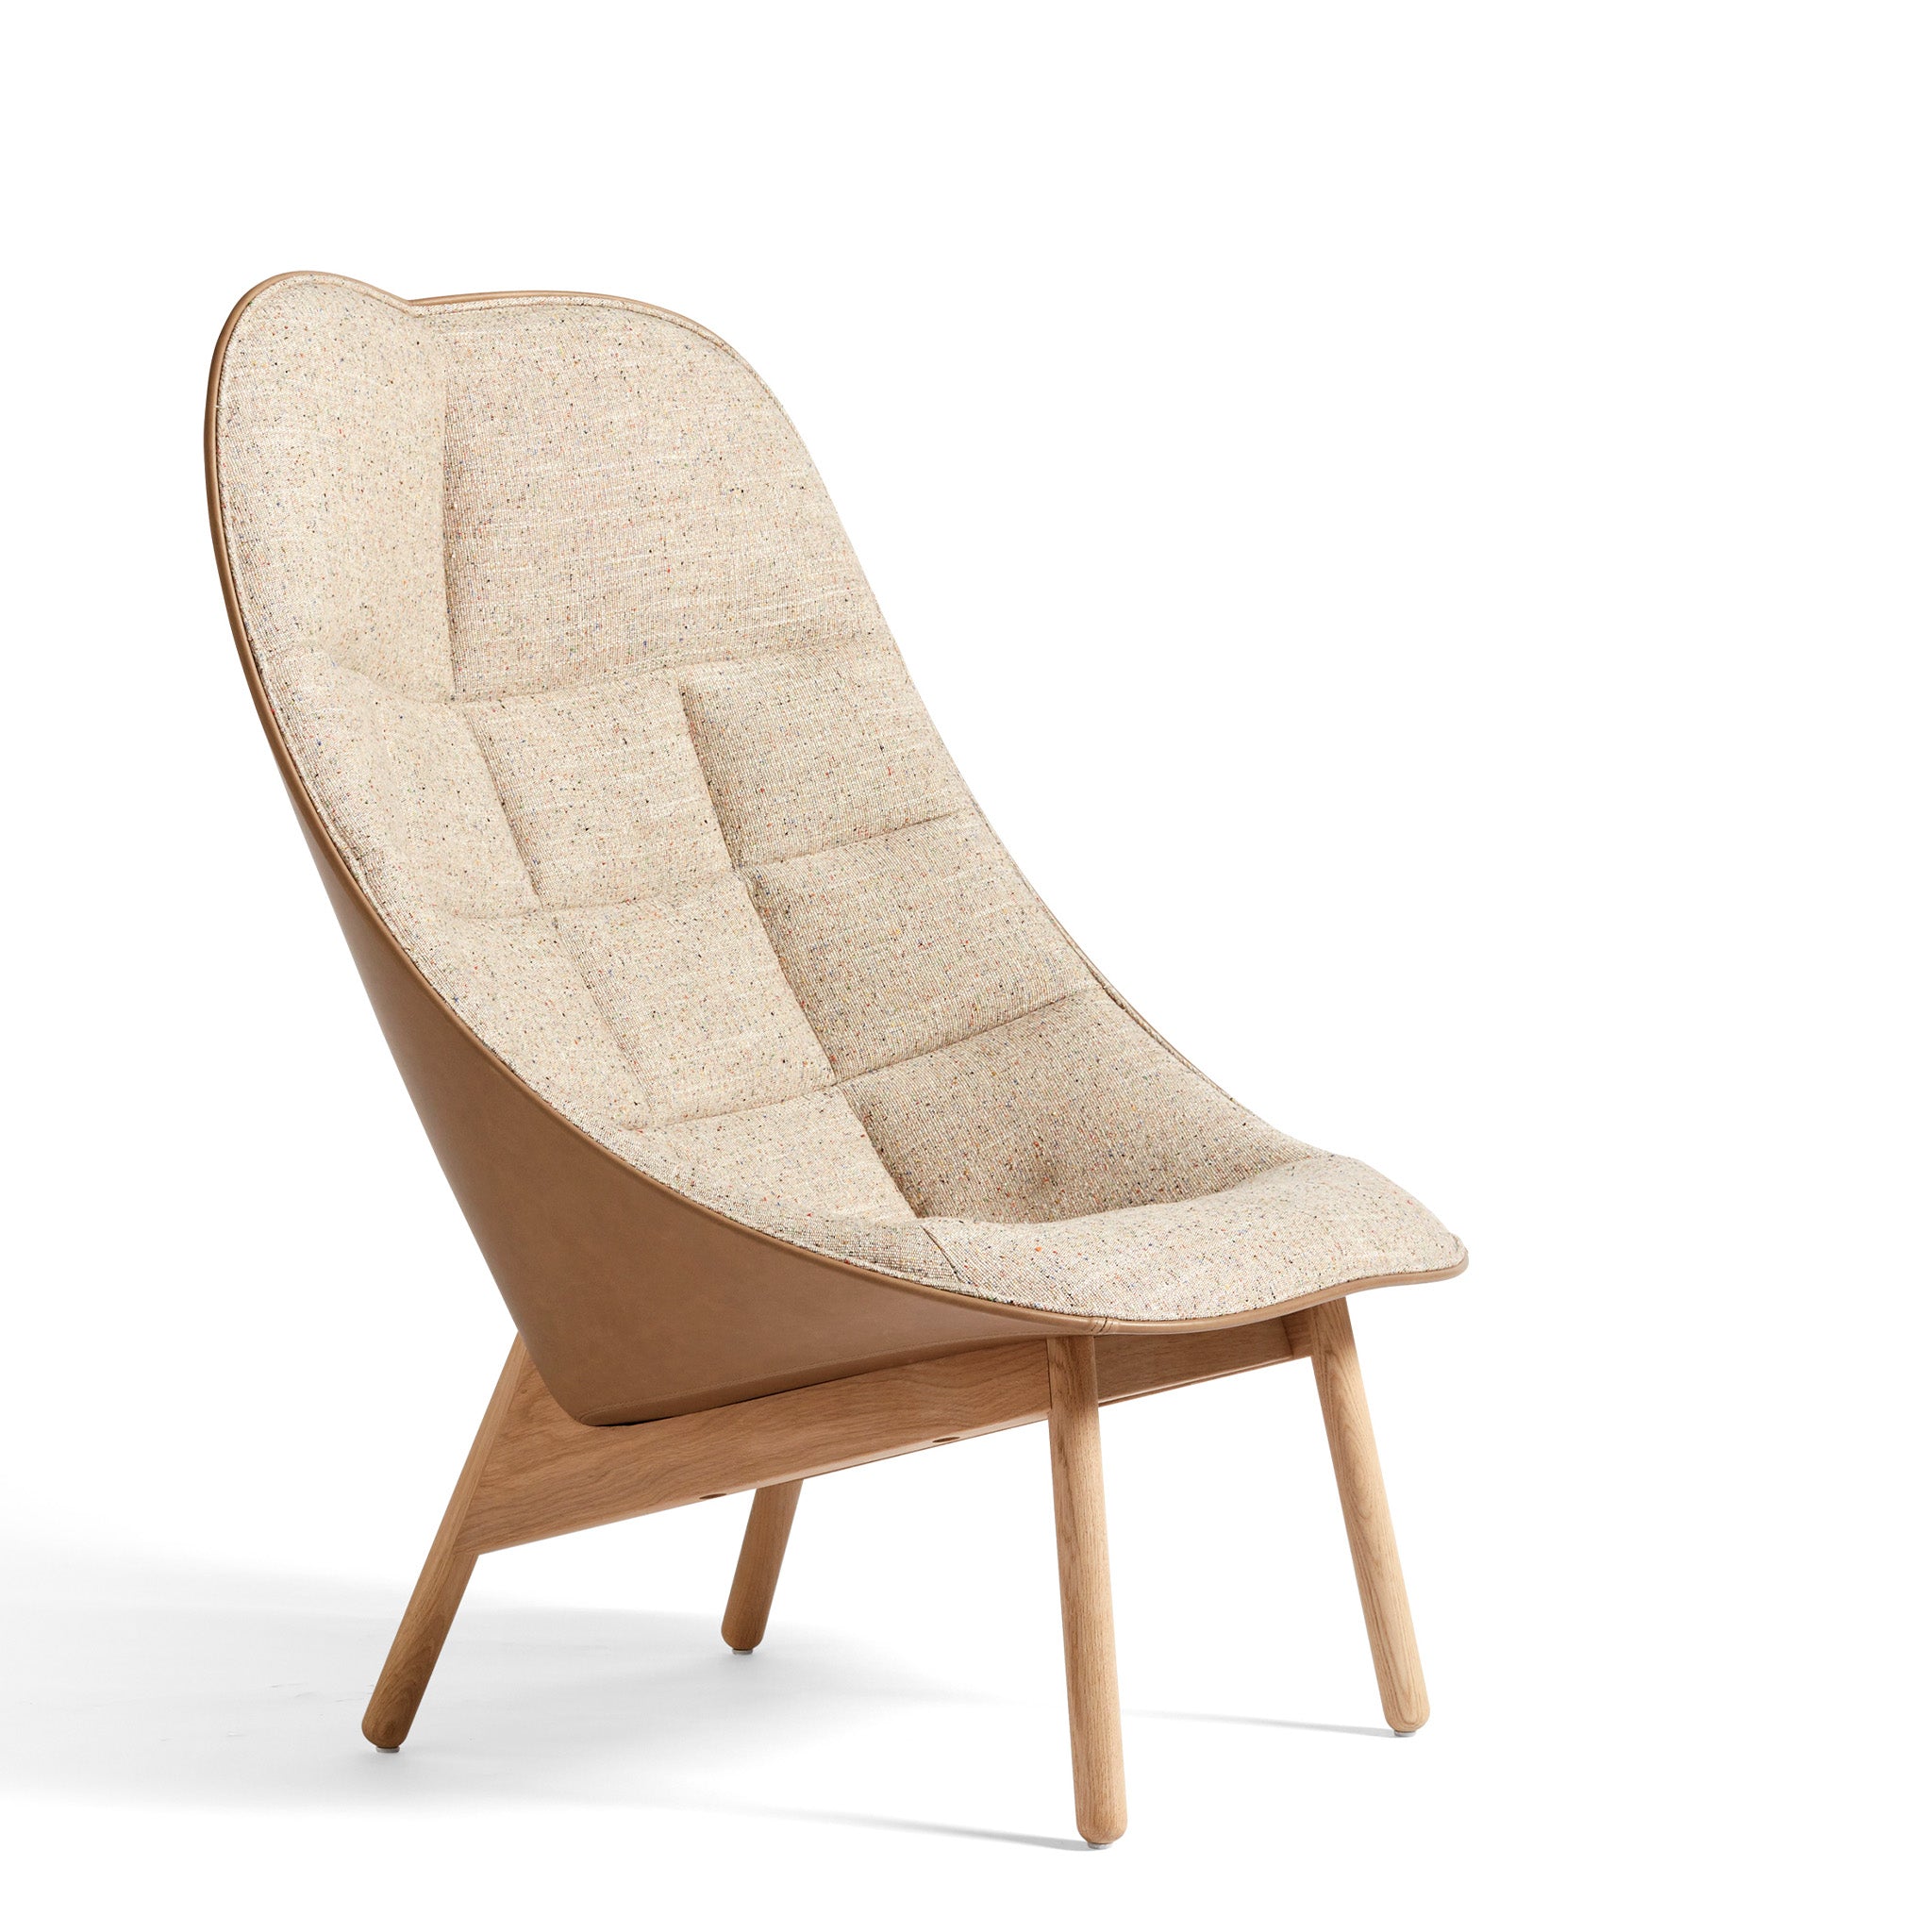 Uchiwa Quilt Chair by Hay